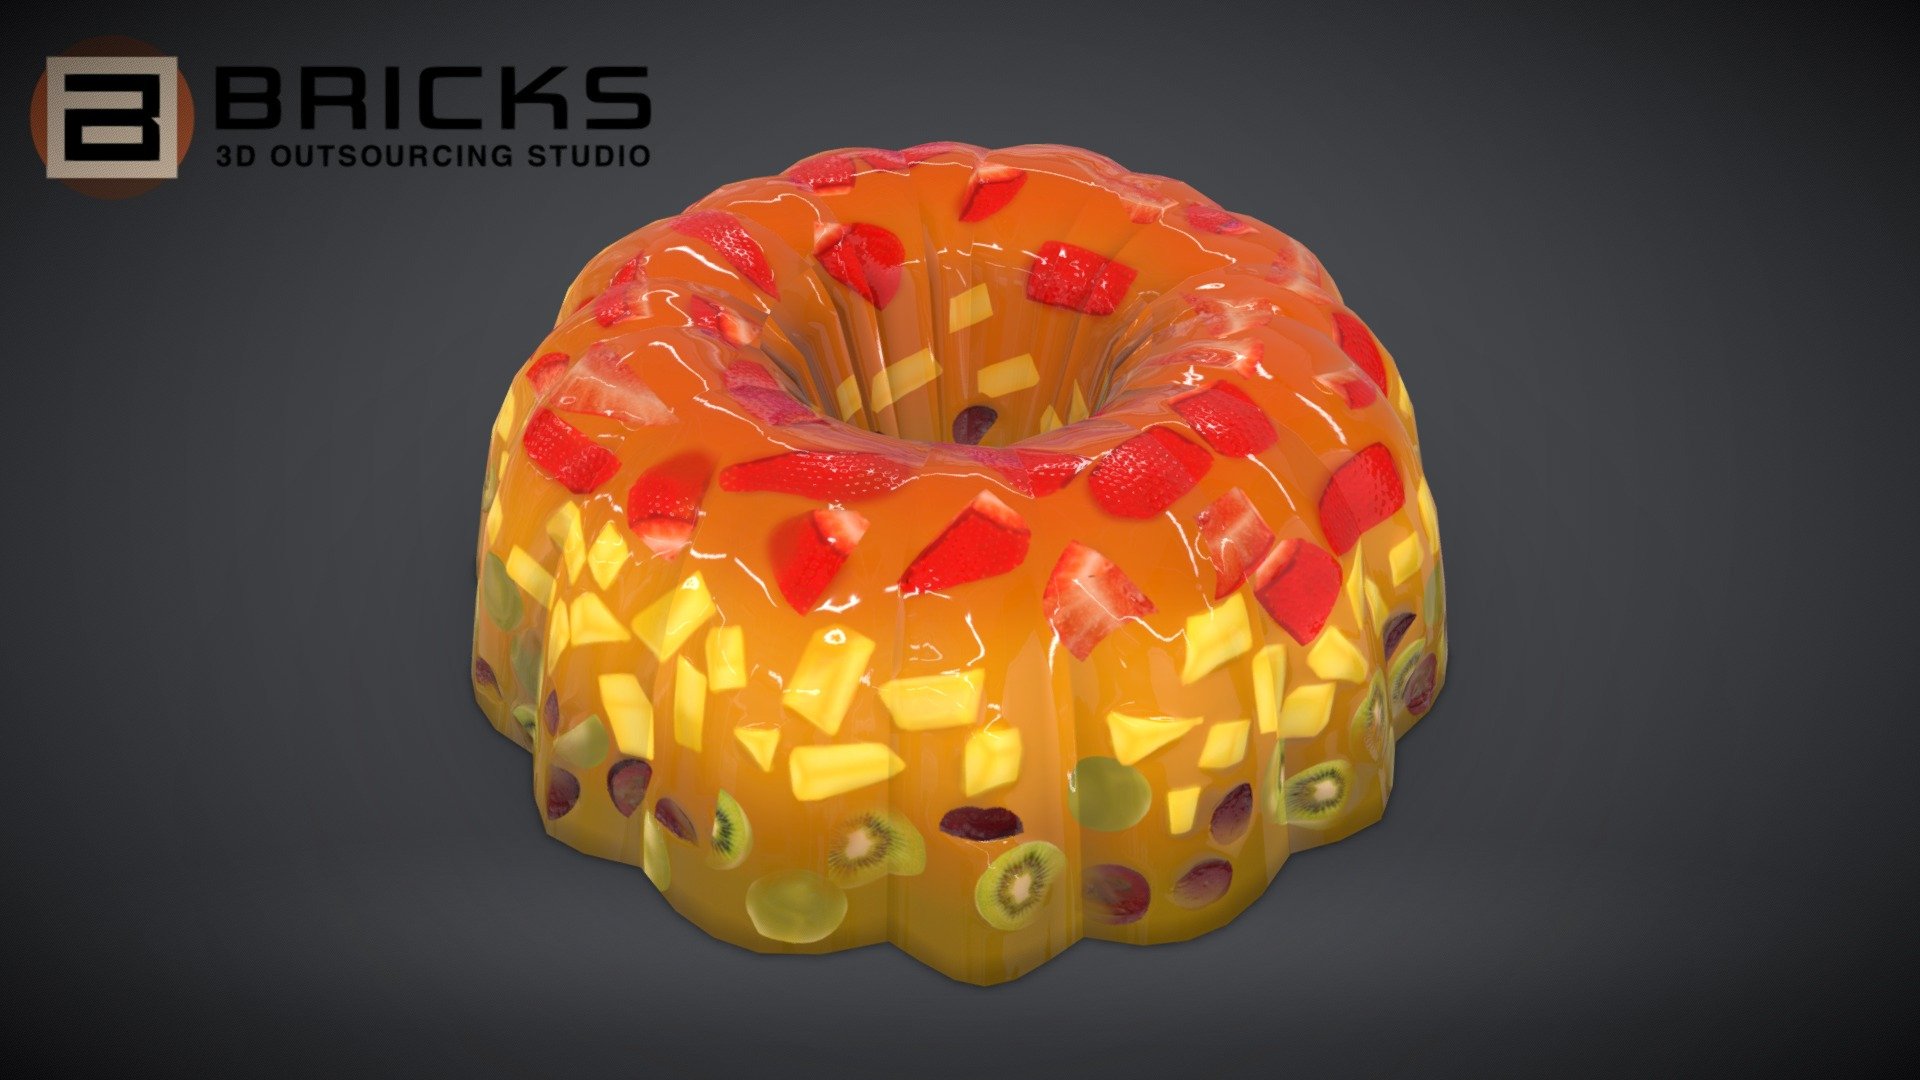 PBR Food Asset:
MixedFruitsJelly
Polycount: 1536
Vertex count: 768
Texture Size: 2048px x 2048px
Normal: OpenGL

If you need any adjust in file please contact us: team@bricks3dstudio.com

Hire us: tringuyen@bricks3dstudio.com
Here is us: https://www.bricks3dstudio.com/
        https://www.artstation.com/bricksstudio
        https://www.facebook.com/Bricks3dstudio/
        https://www.linkedin.com/in/bricks-studio-b10462252/ - MixedFruitsJelly - Buy Royalty Free 3D model by Bricks Studio (@bricks3dstudio) 3d model